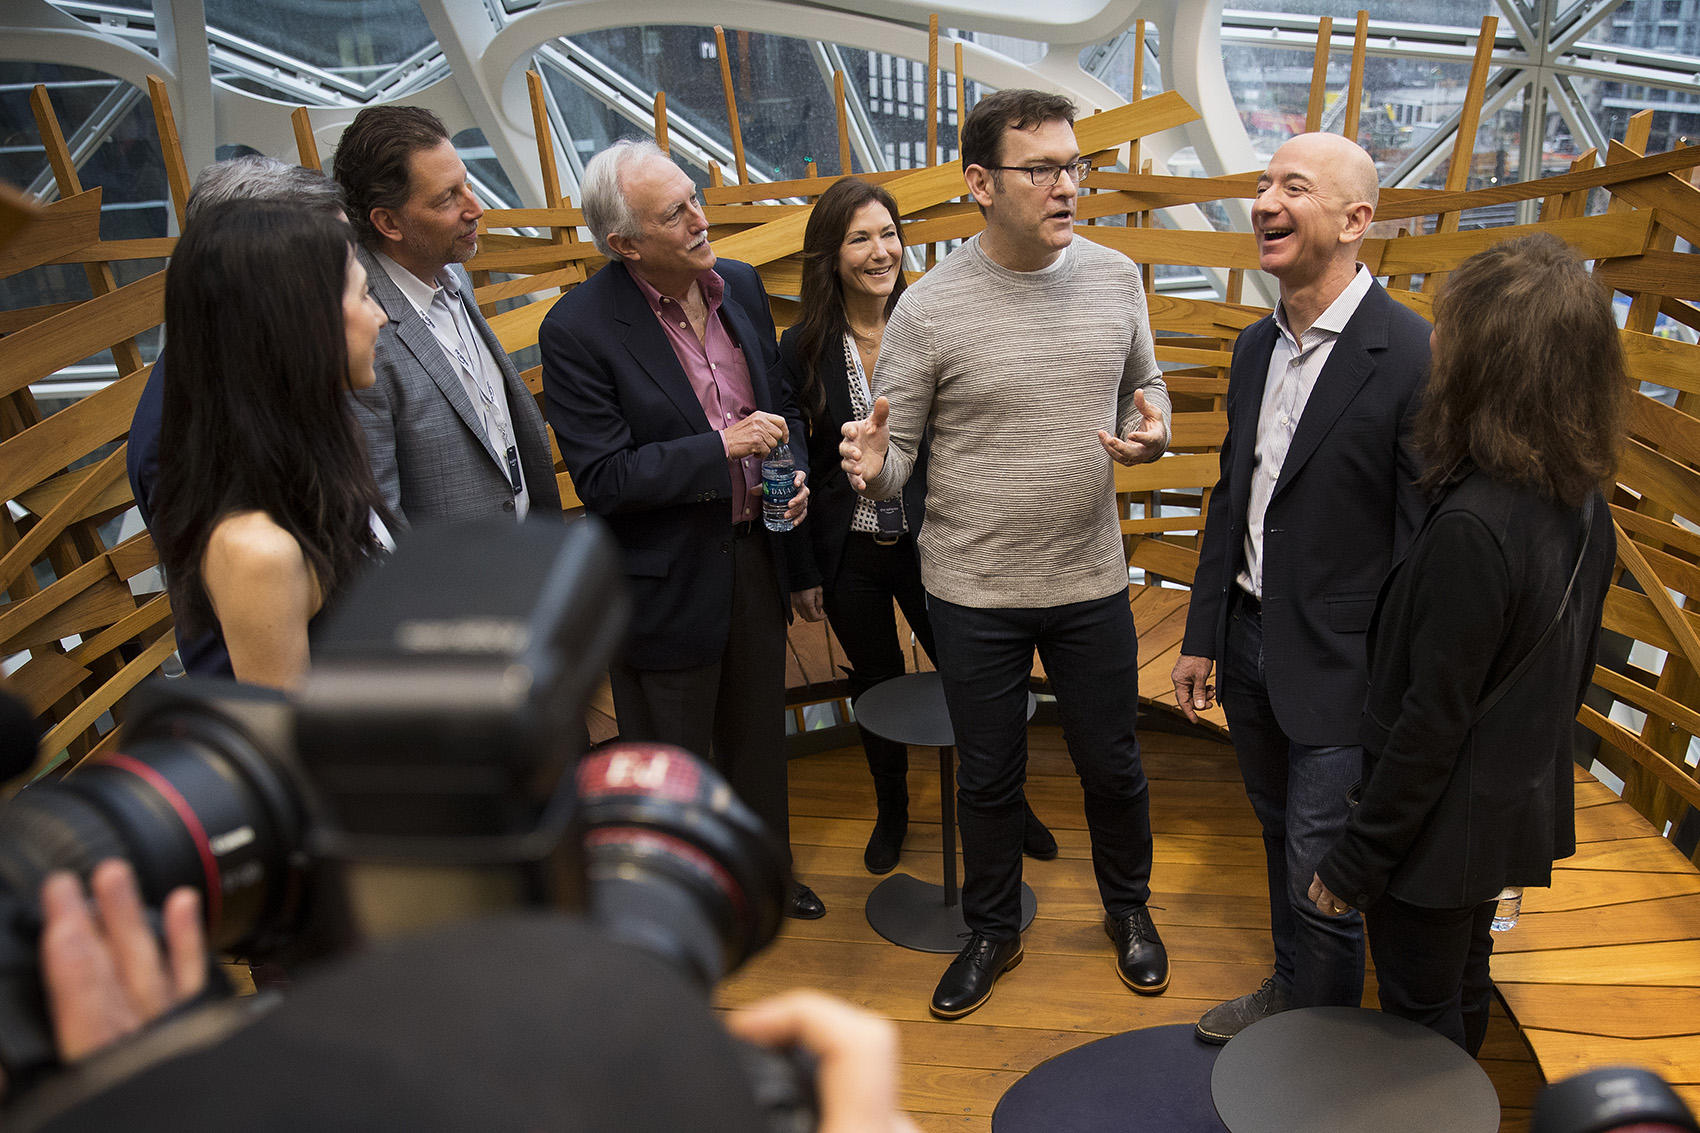 Jeff Bezos, right, laughs while touring the Amazon spheres on Monday, January 29, 2018, during the spheres grand opening in Seattle. 